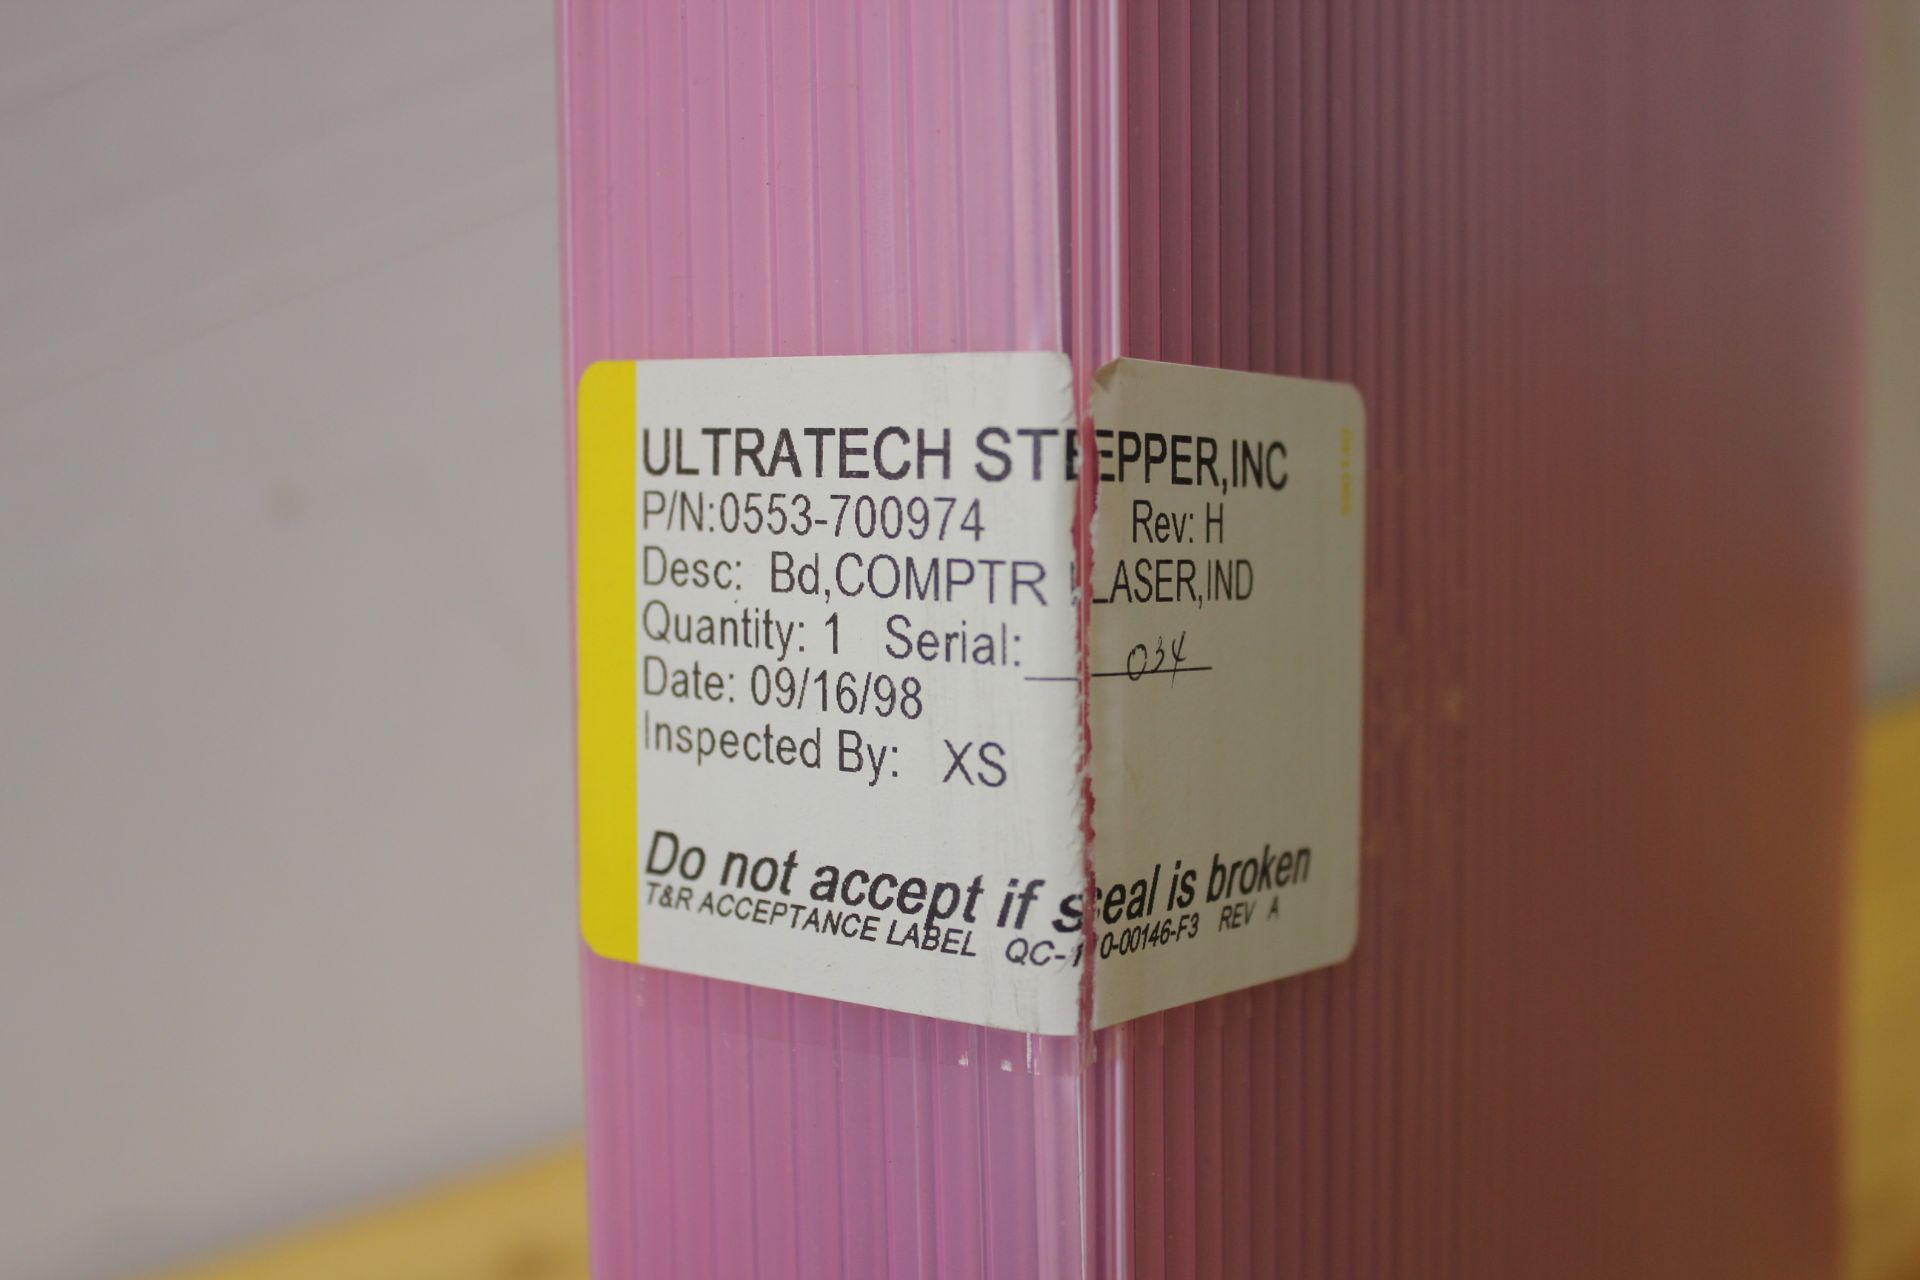 ULTRATECH STEPPER LITHOGRAPHY LASER COMPARATOR BOARD PN: 0553-700974 REV. H - Image 2 of 3